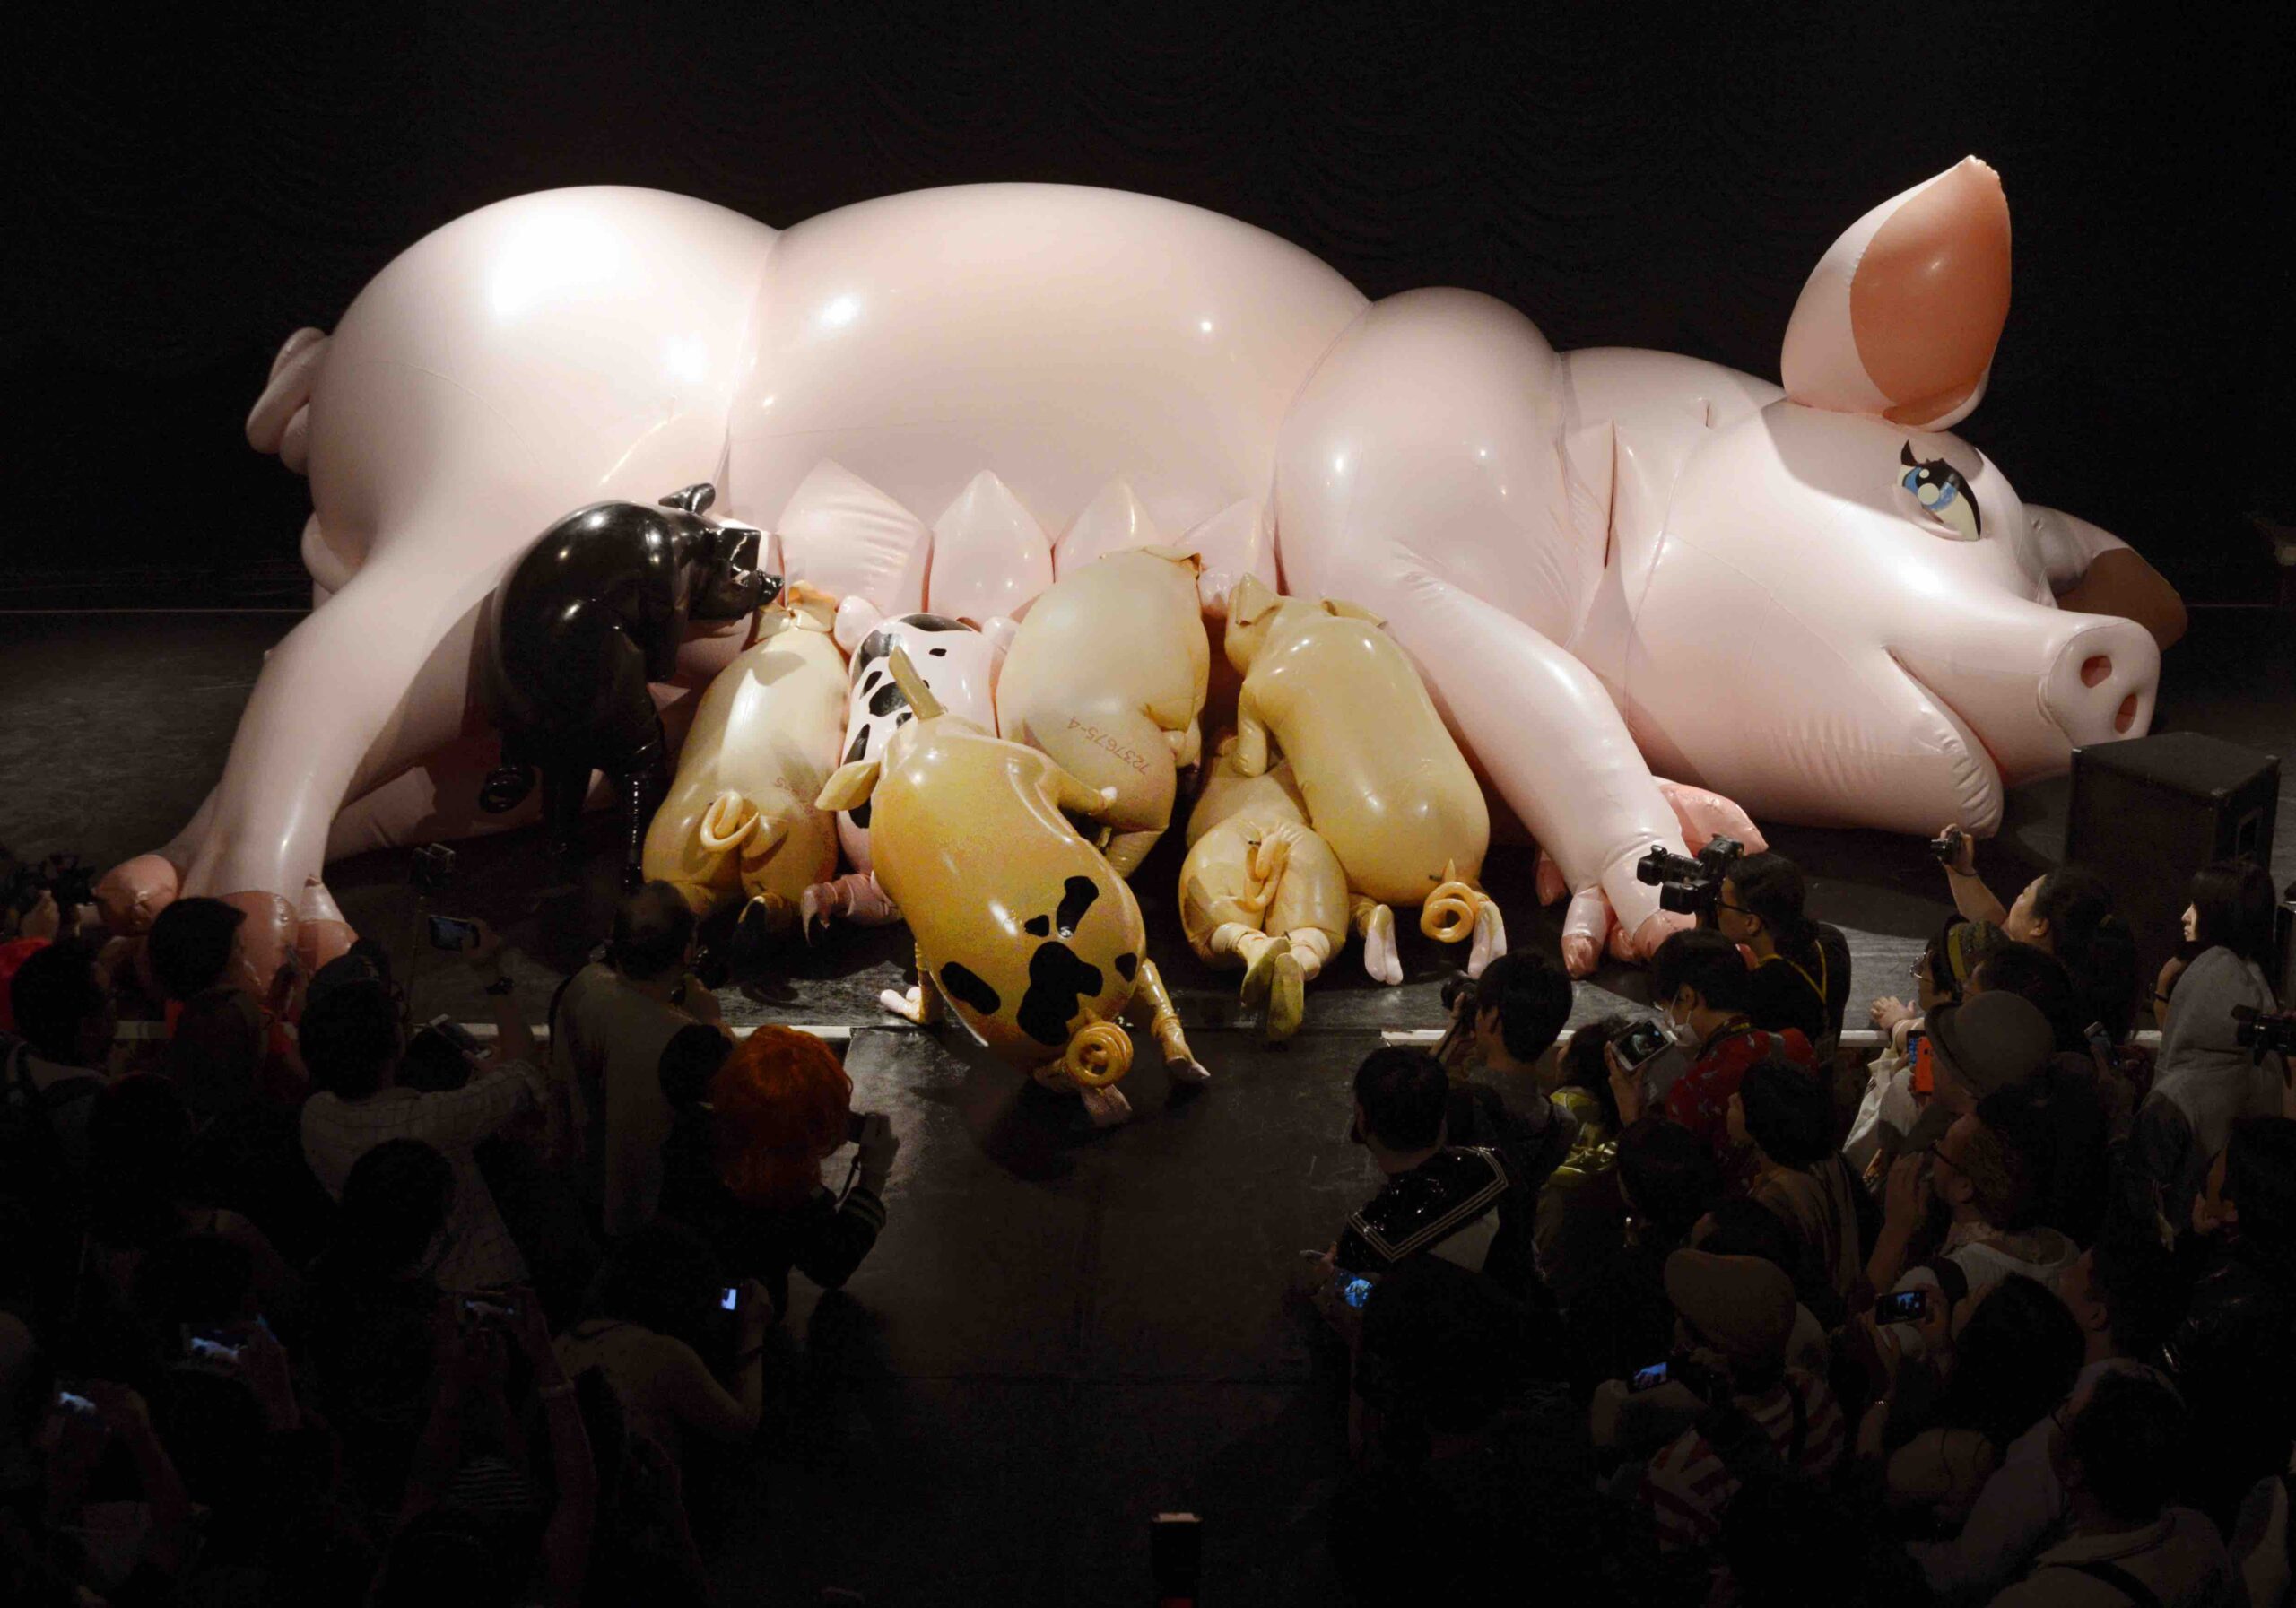 A giant latex sow is suckled by 6 latex piglets. 